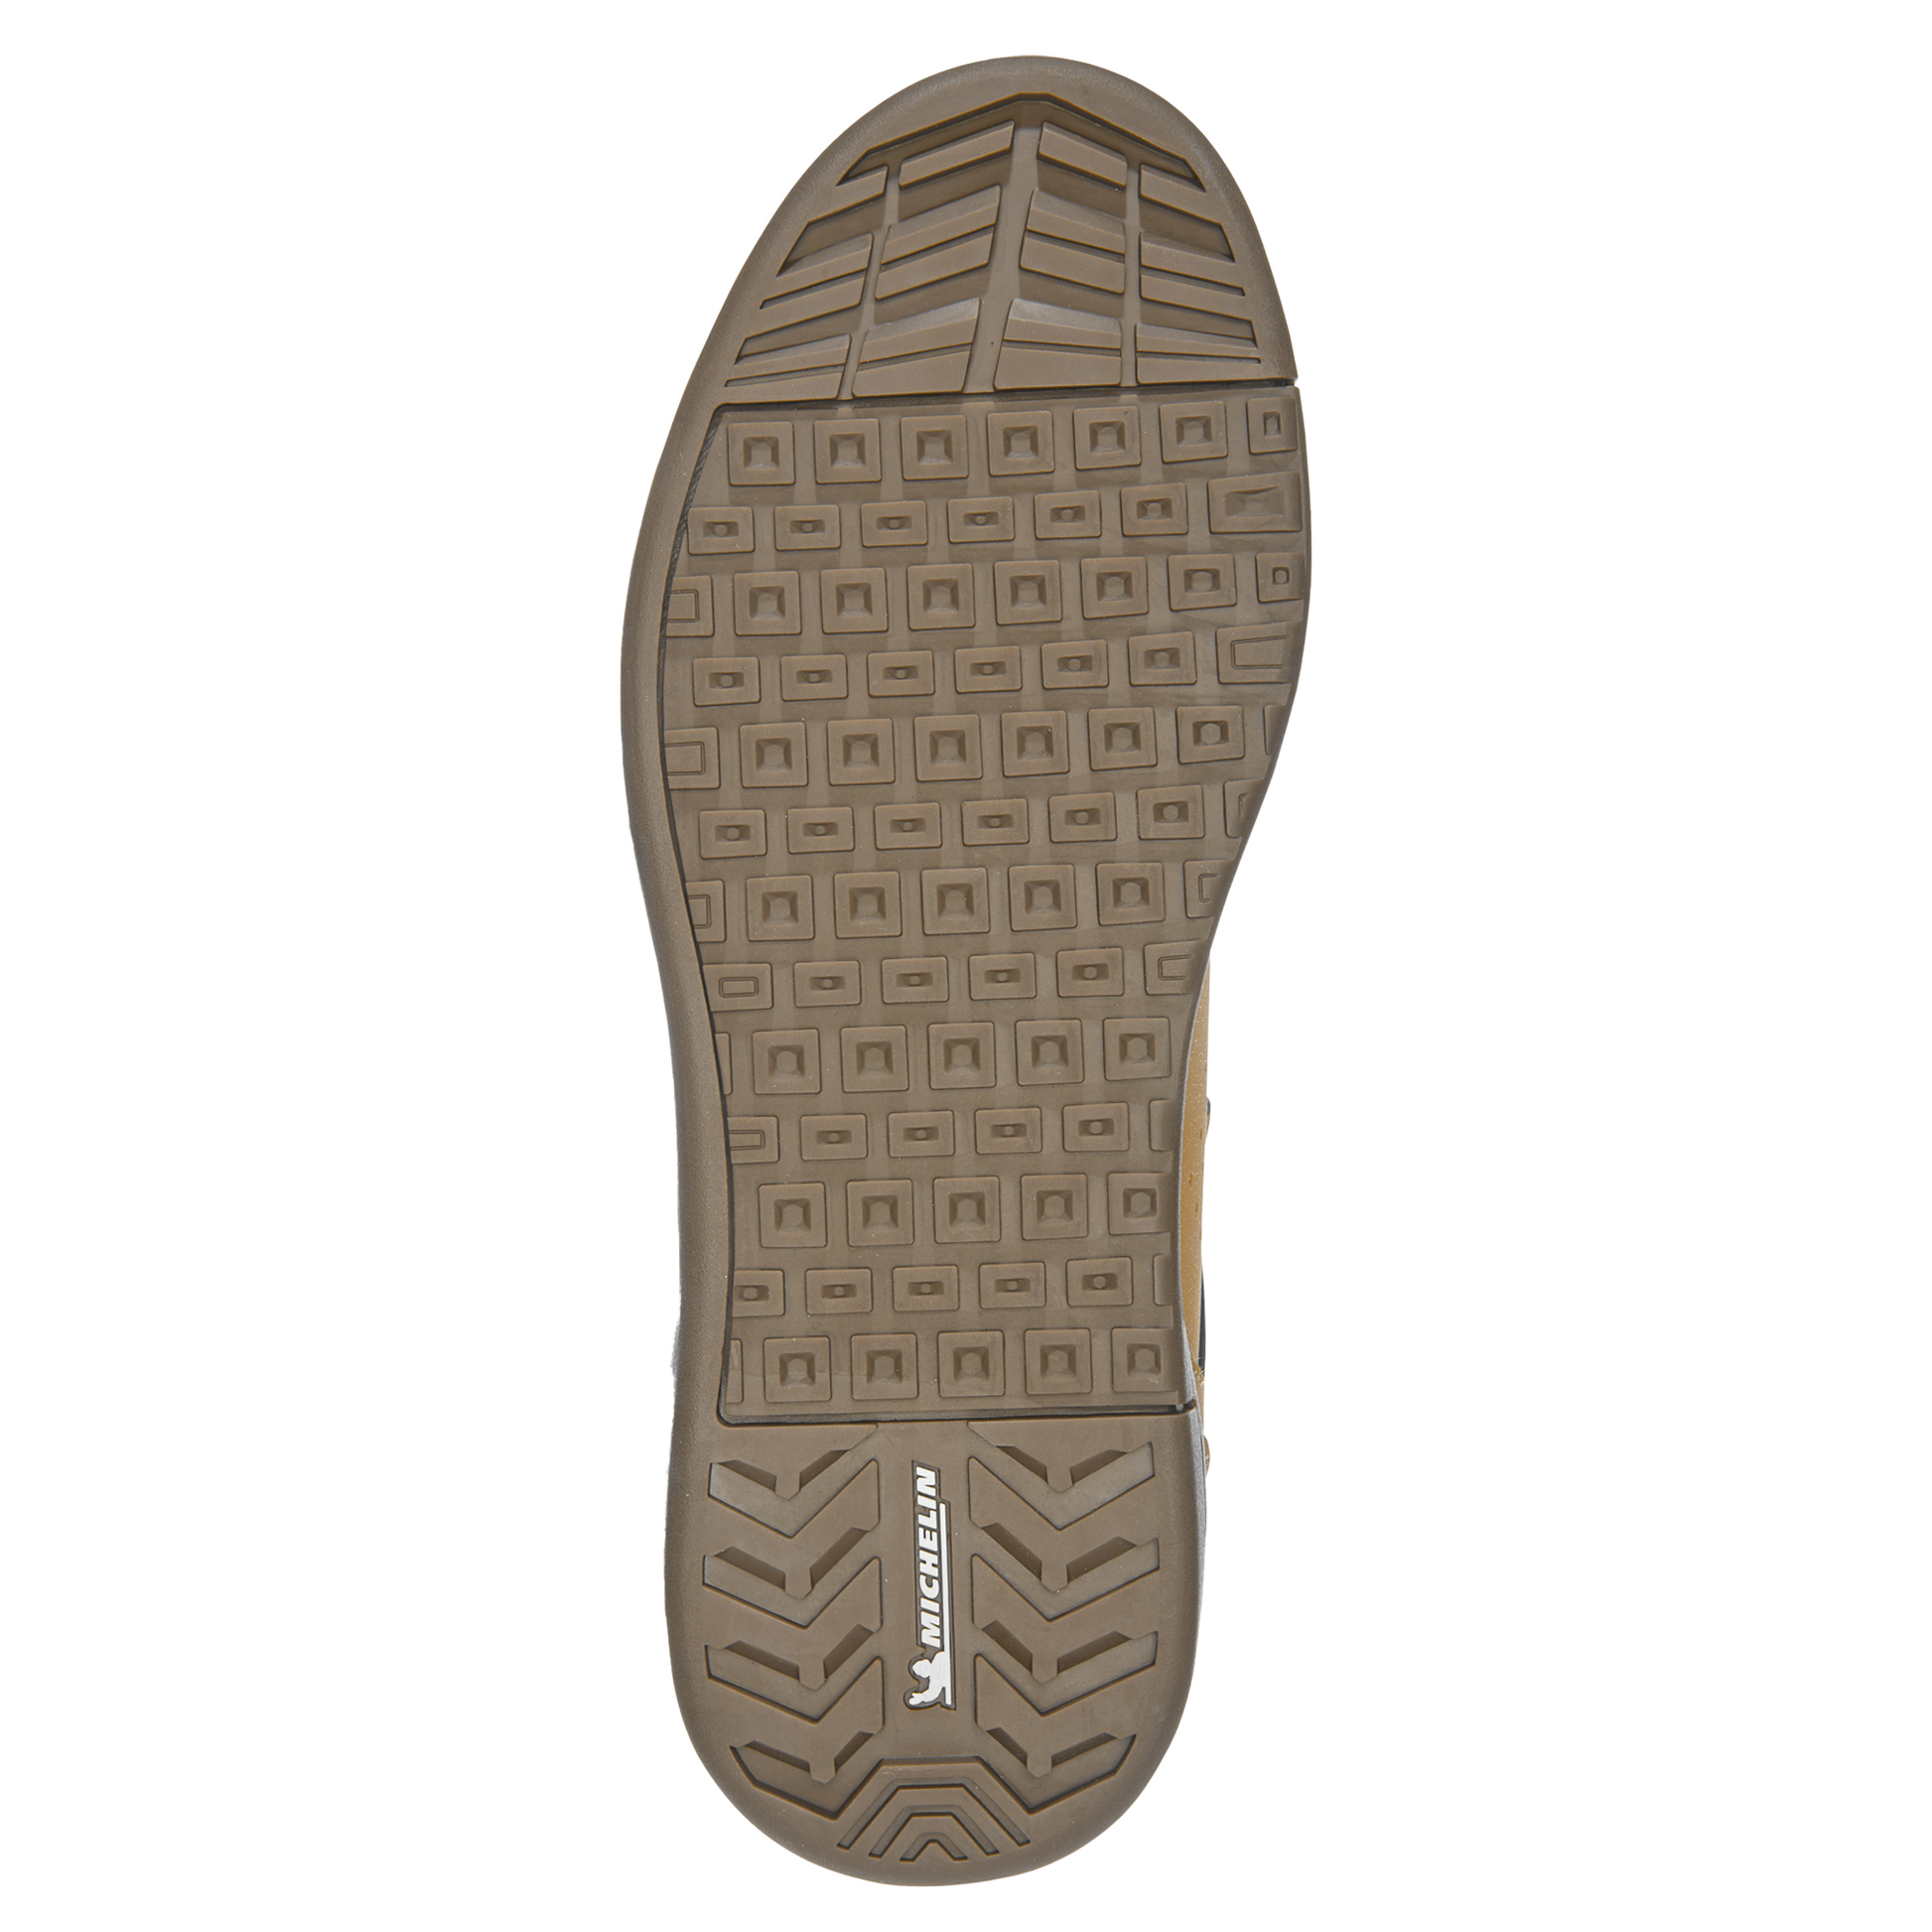 Etnies Camber Mid Michelin x TFTF Flat Shoes - US 13.0 - Tan - Gum - Image 4